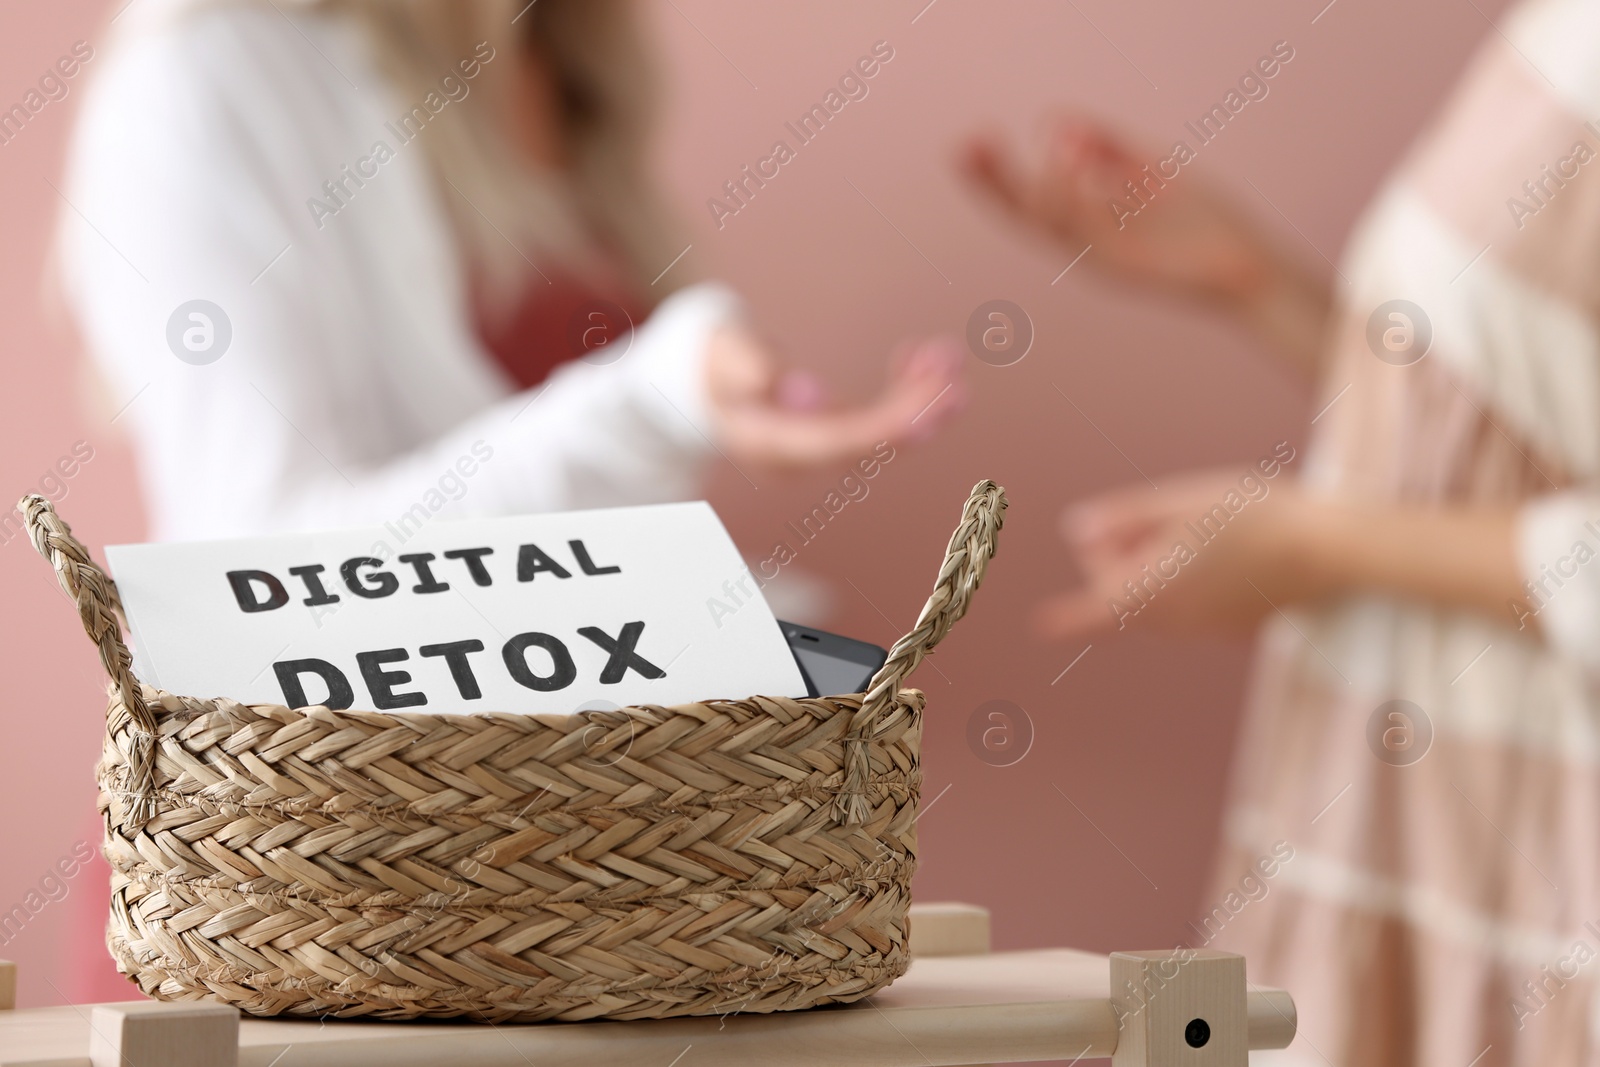 Photo of Women chatting against pink background, focus on wicker basket with sign DIGITAL DETOX